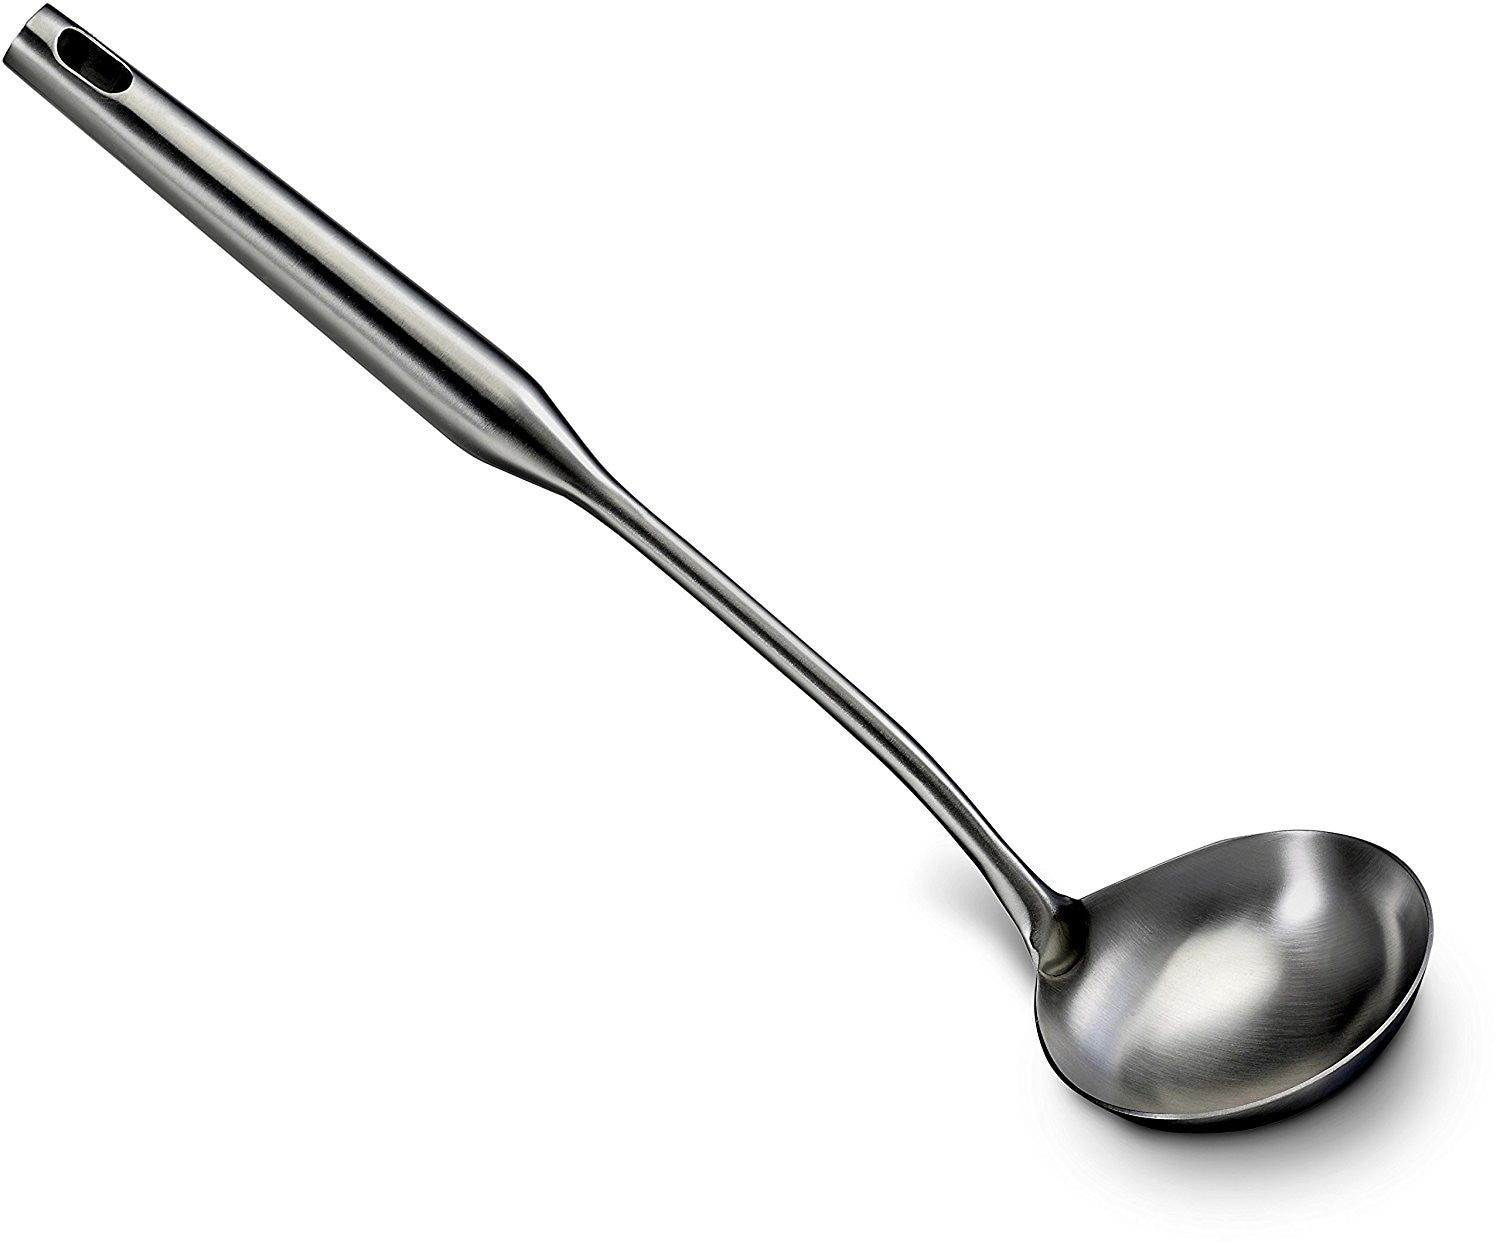 Large Soup Ladle - Flatware Soup Ladles To Serve Soups And Sauces - Canning  Ladel Cup - Heavy Duty Commercial Restaurant Quality Dishwasher Safe  Stainless Steel Serving Utensil by Pro Chef Kitchen